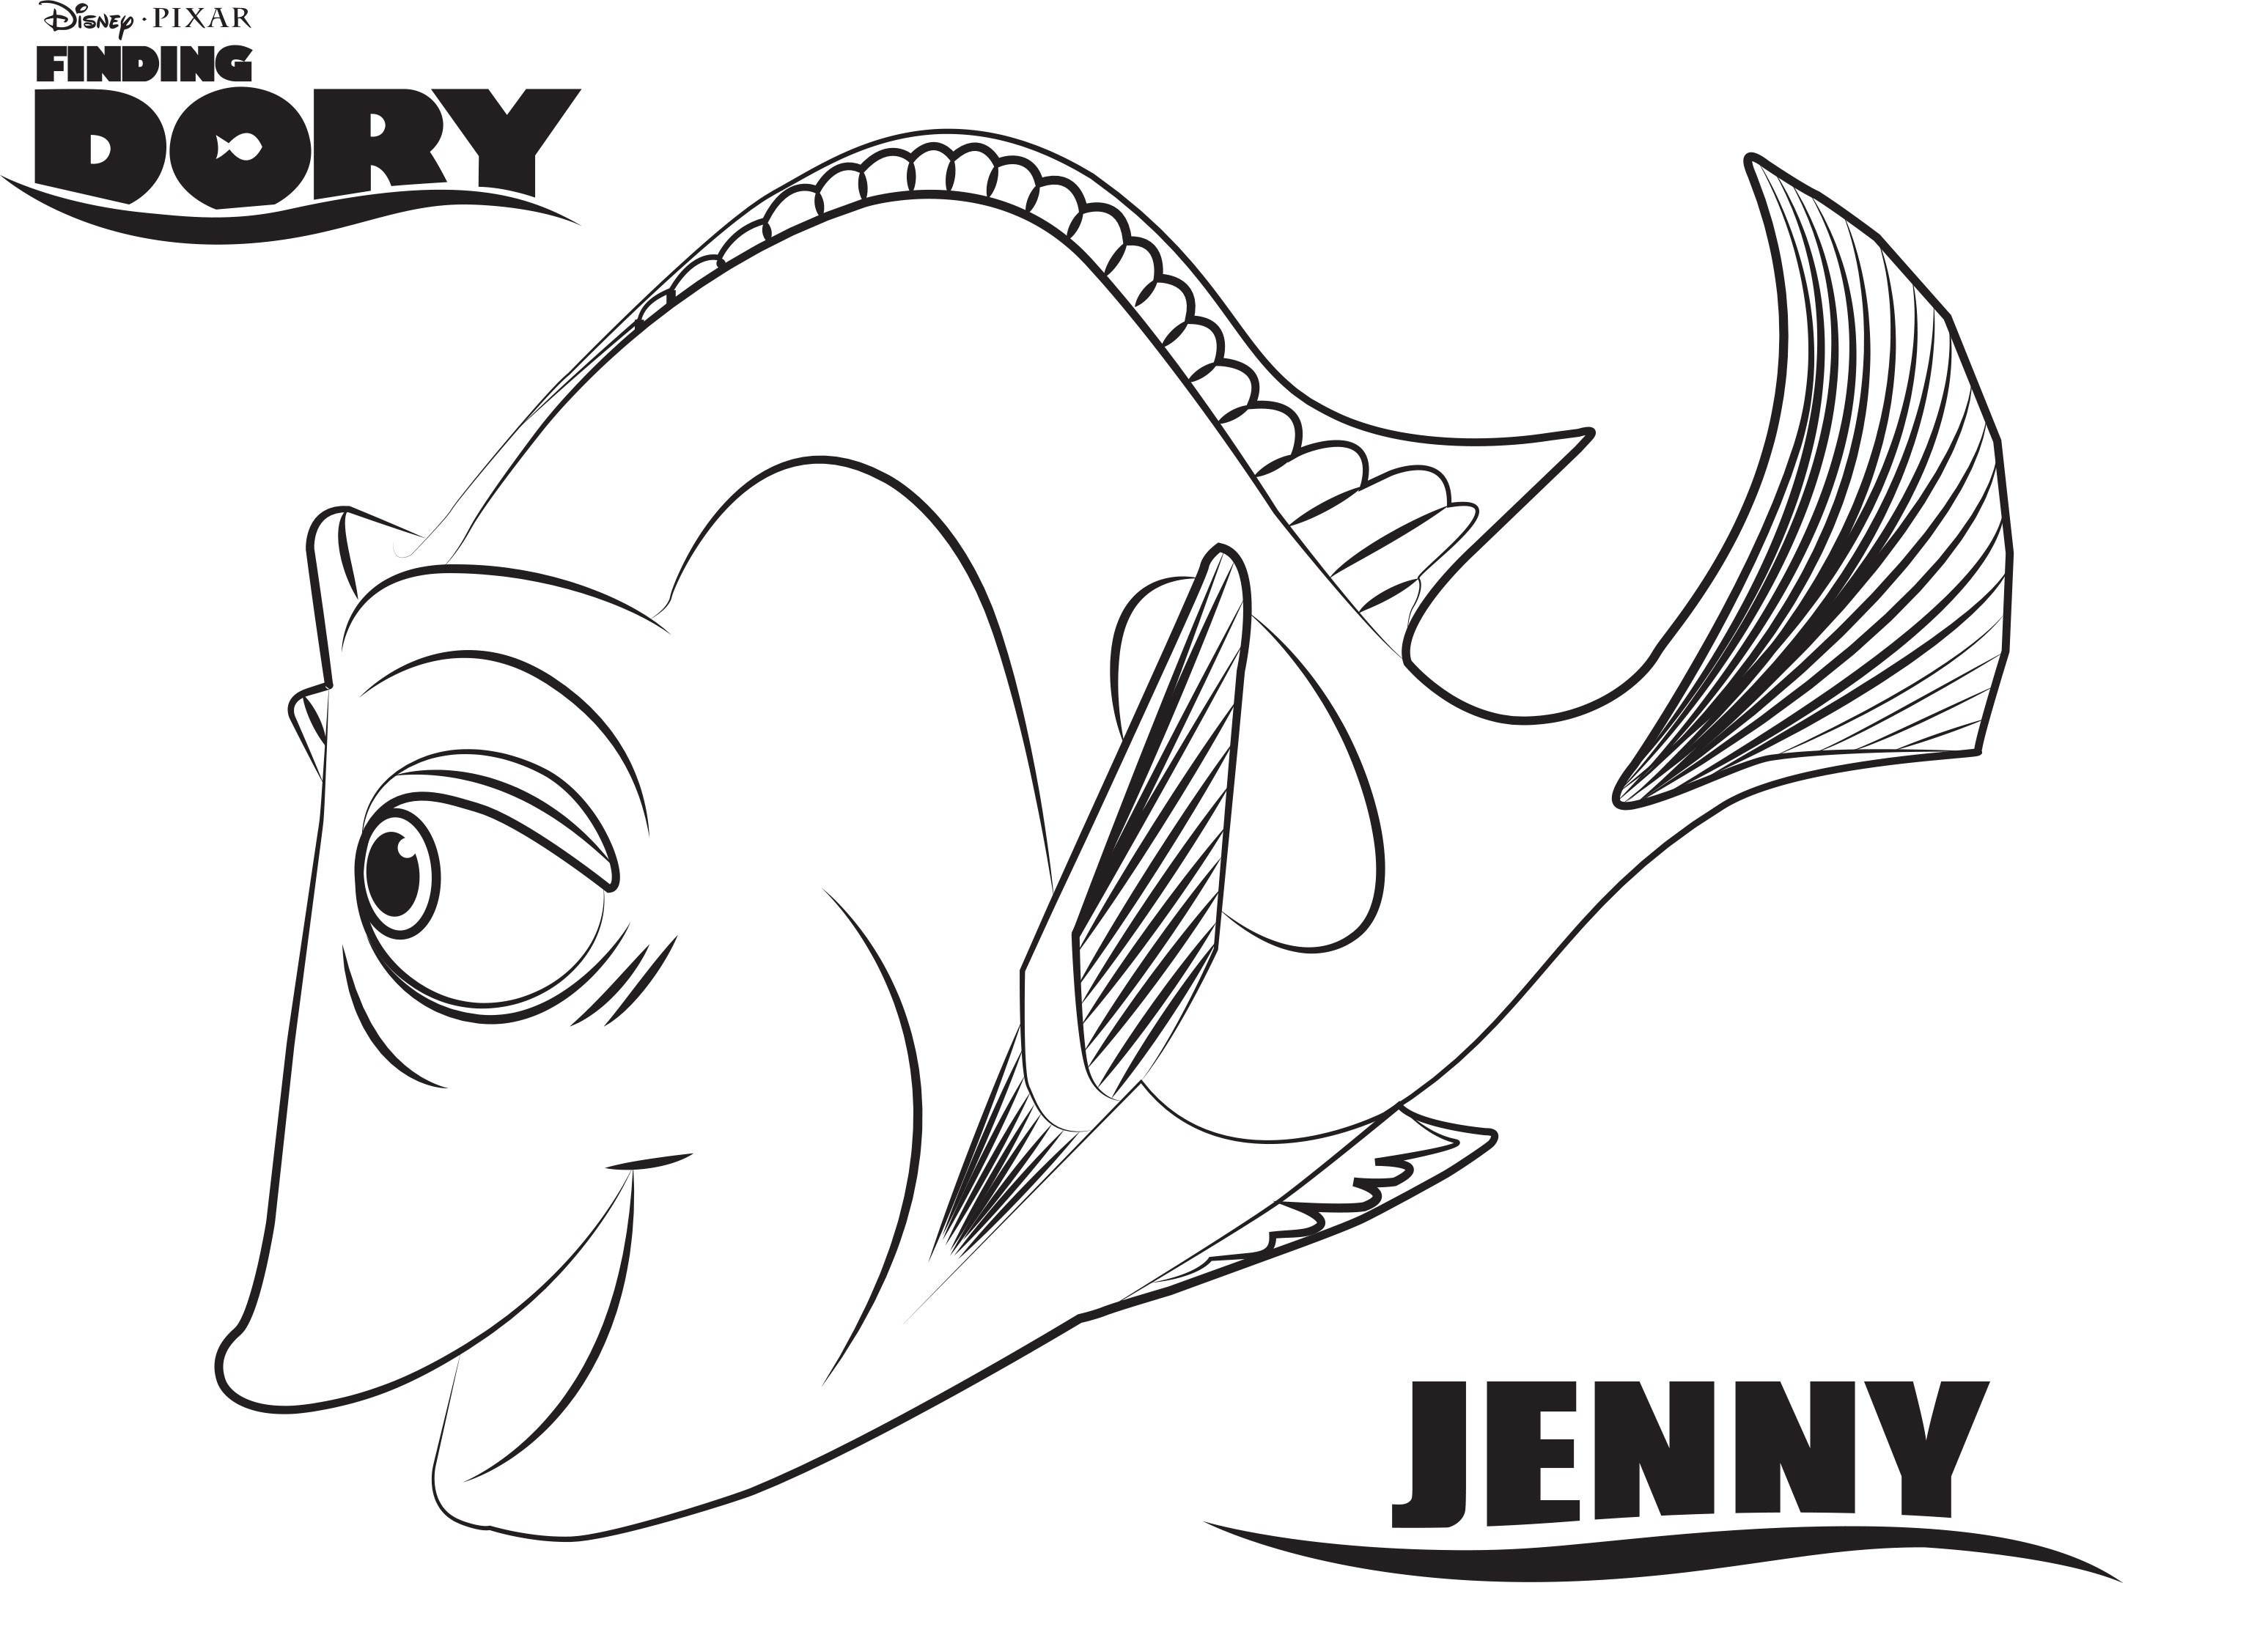 Finding Nemo Characters Coloring Pages Dory Coloring Pages Fresh Finding Dory Coloring Pages Printable Free